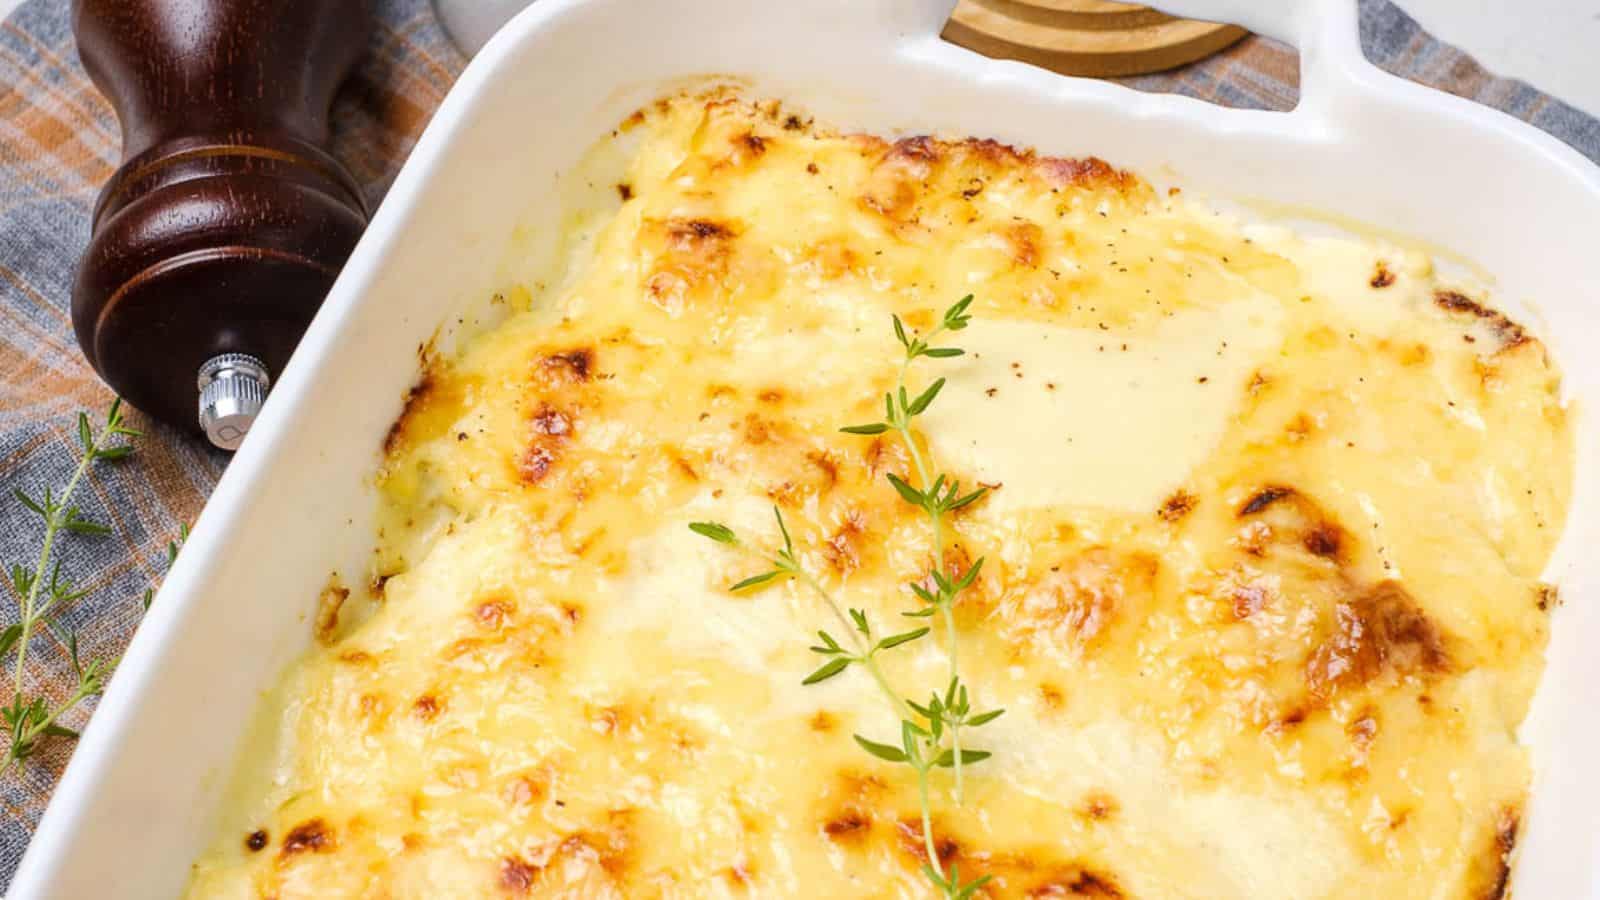 An oven dish with baked dauphinoise potatoes in it.